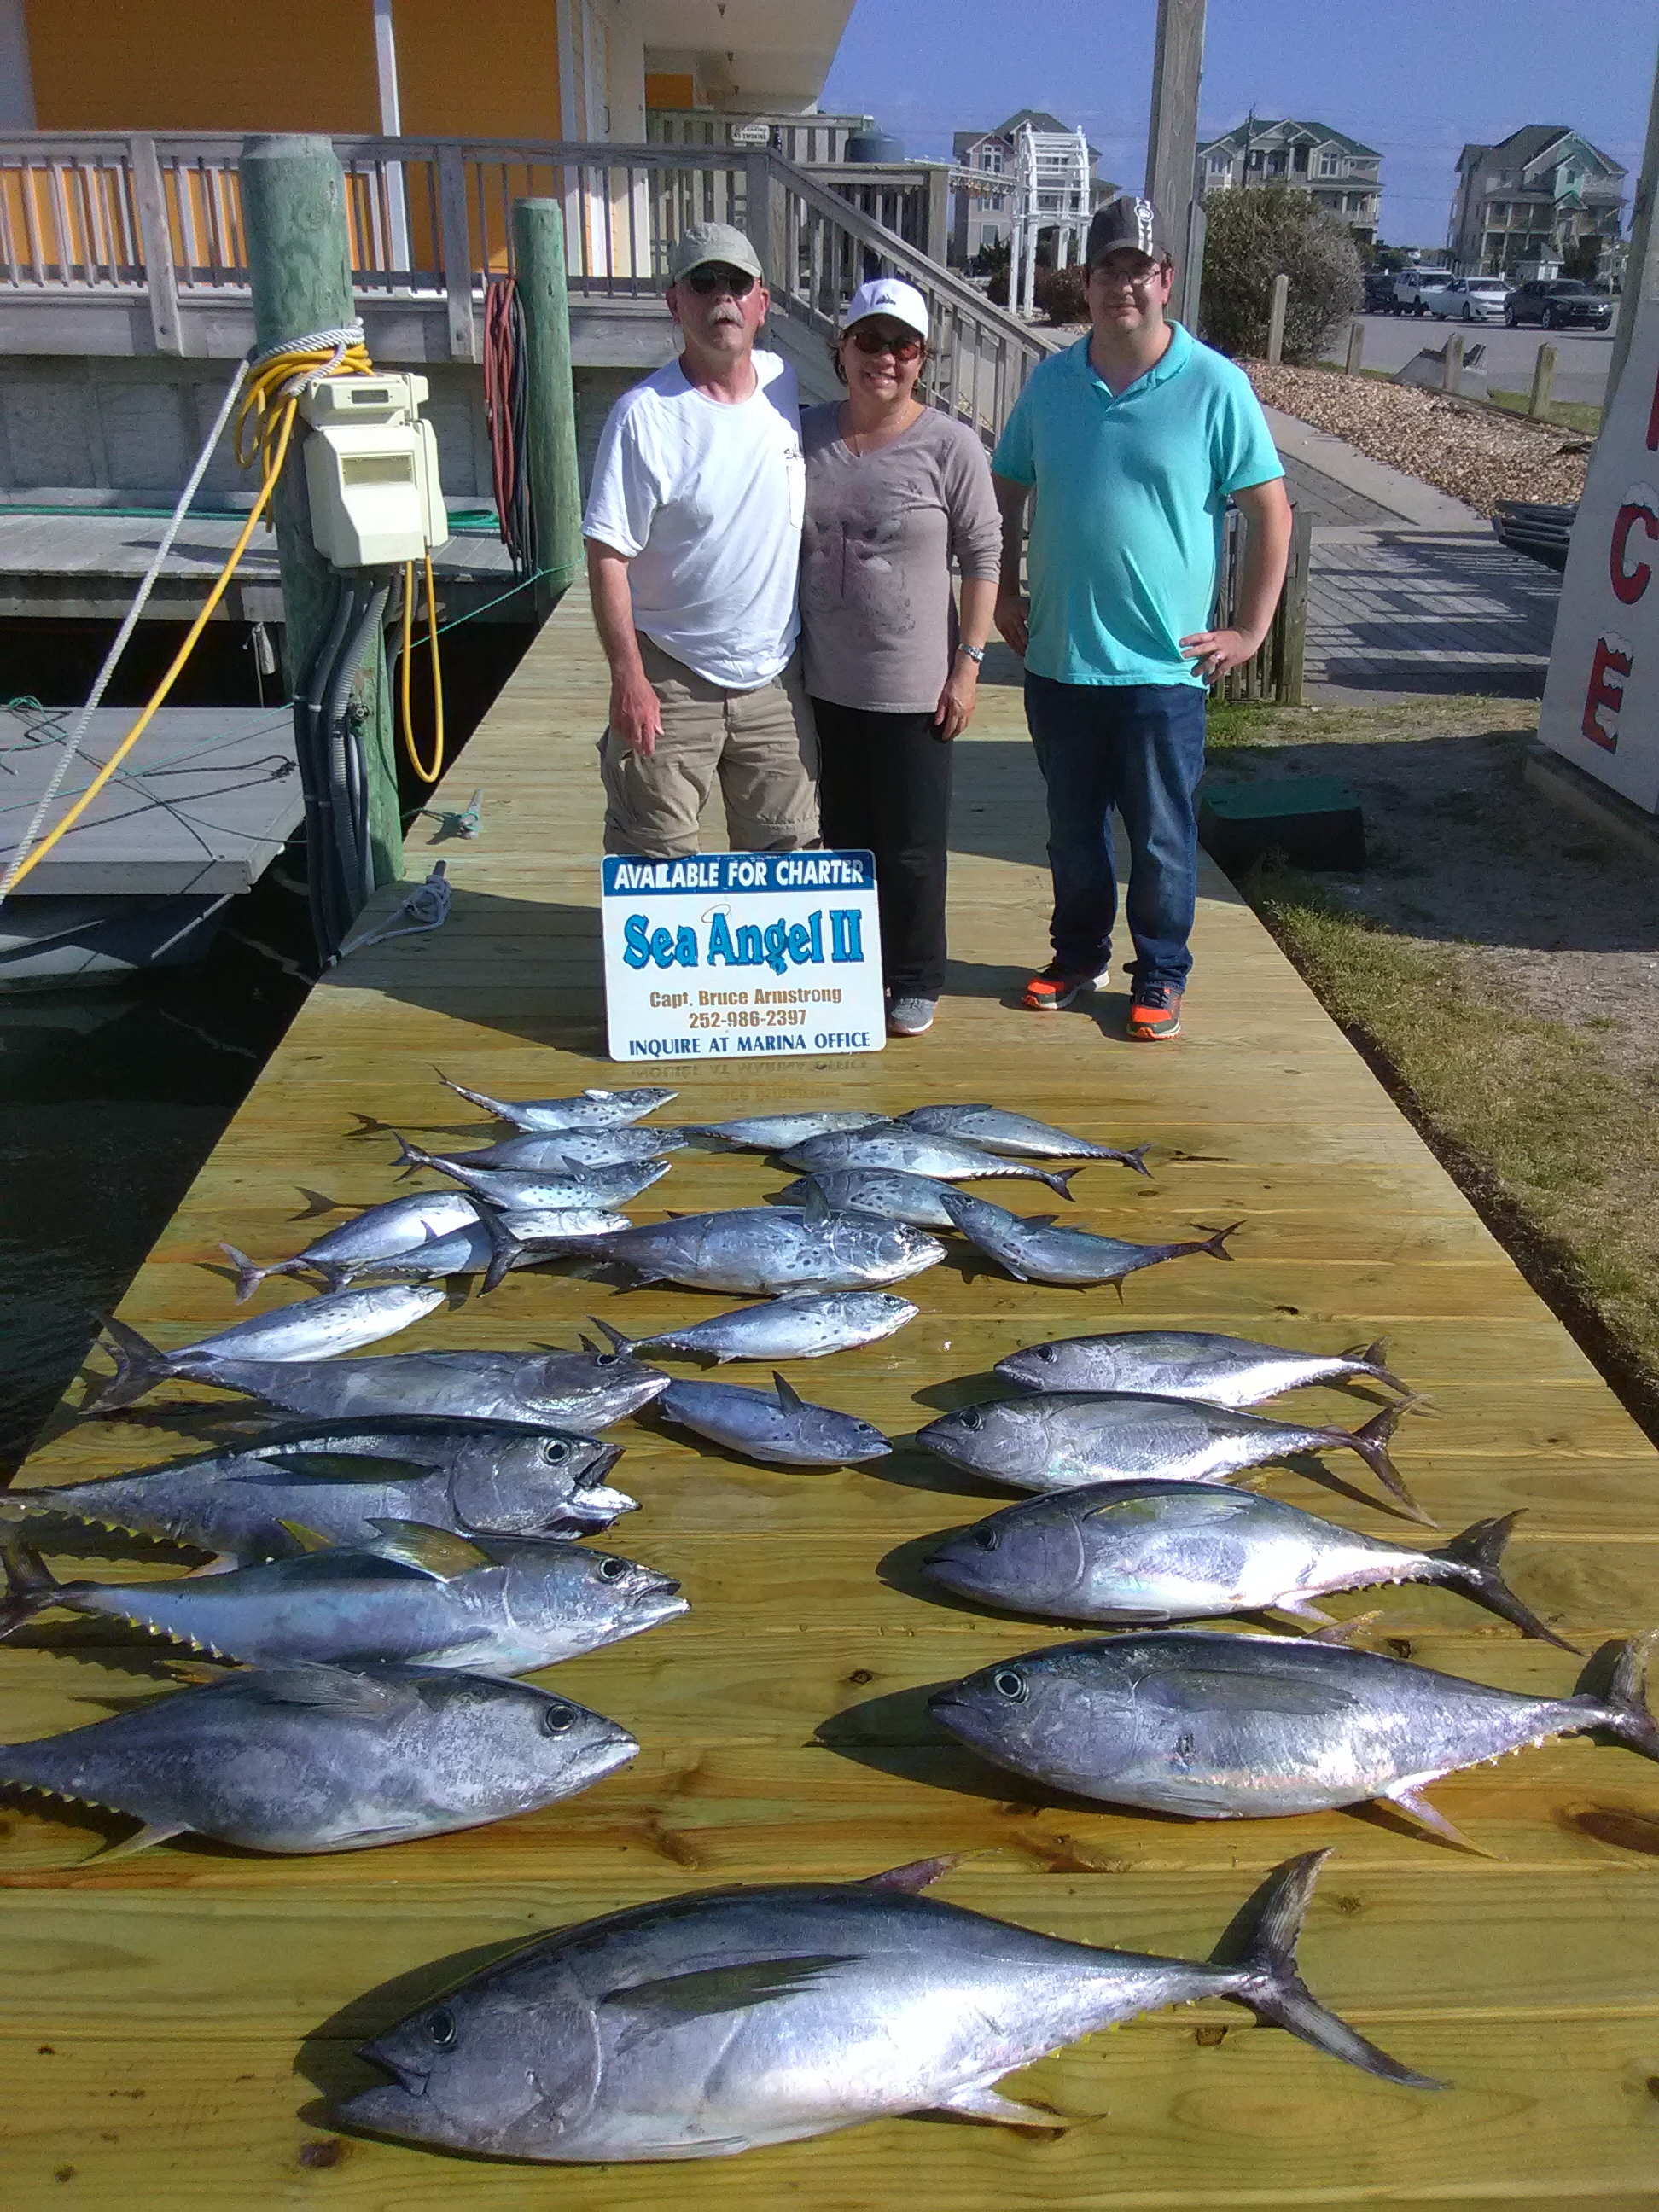 Fishing with Capt. Bruce Armstrong on the Sea Angel II